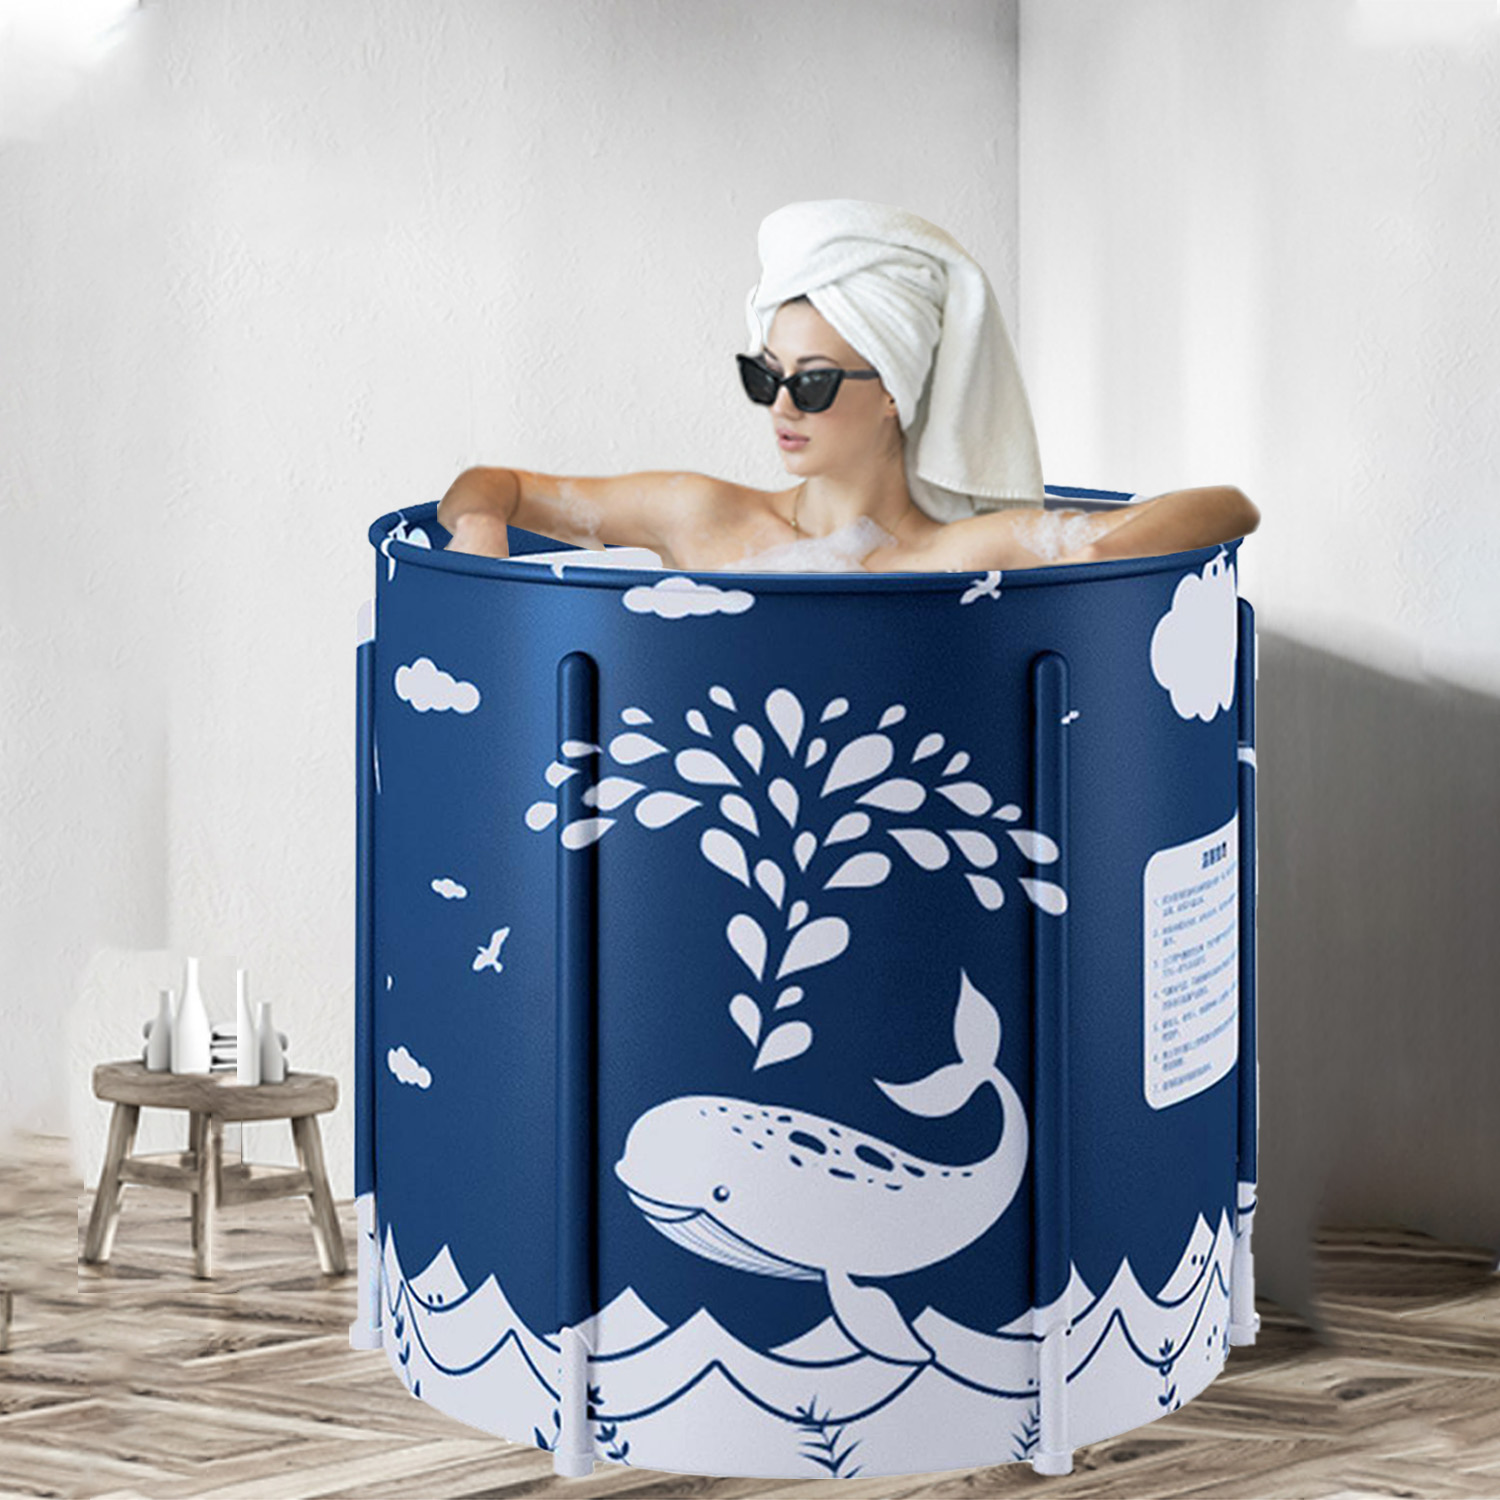 INXTAINER Portable Bathtub Folding Soaking Shower Bathing Tub Freestanding Family SPA Tub for Hot Ice, 27.5x25.5in, Blue - image 1 of 8